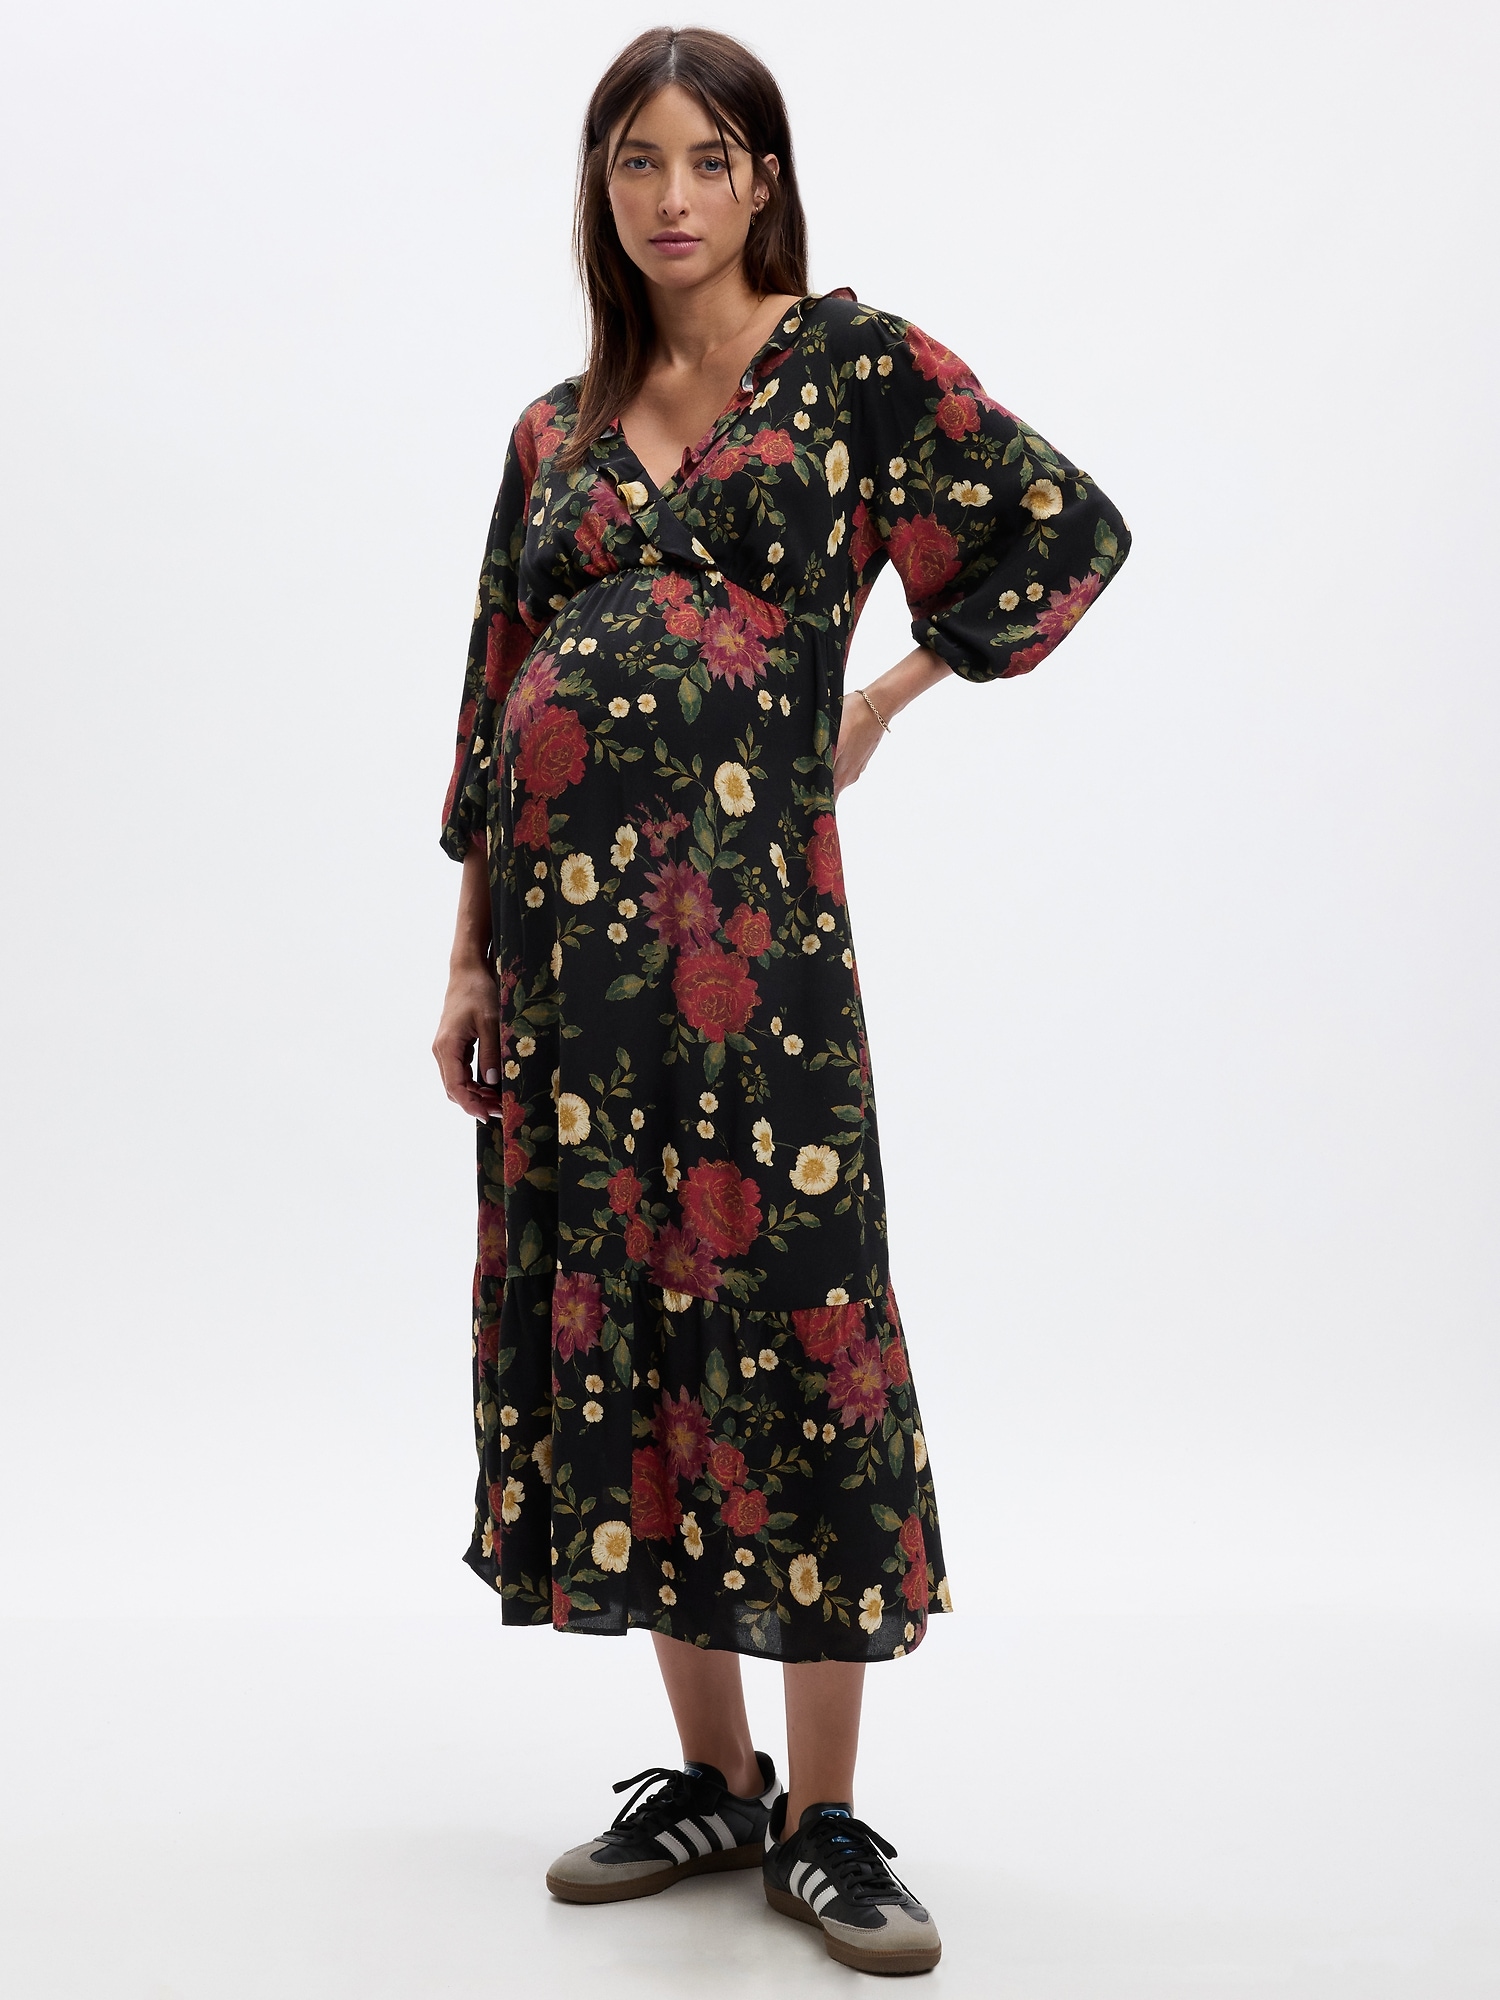 Duck Egg Blue GAP Maternity Cross Over Faux Wrap Maternity Dress (Gently  Used - Size XSmall )